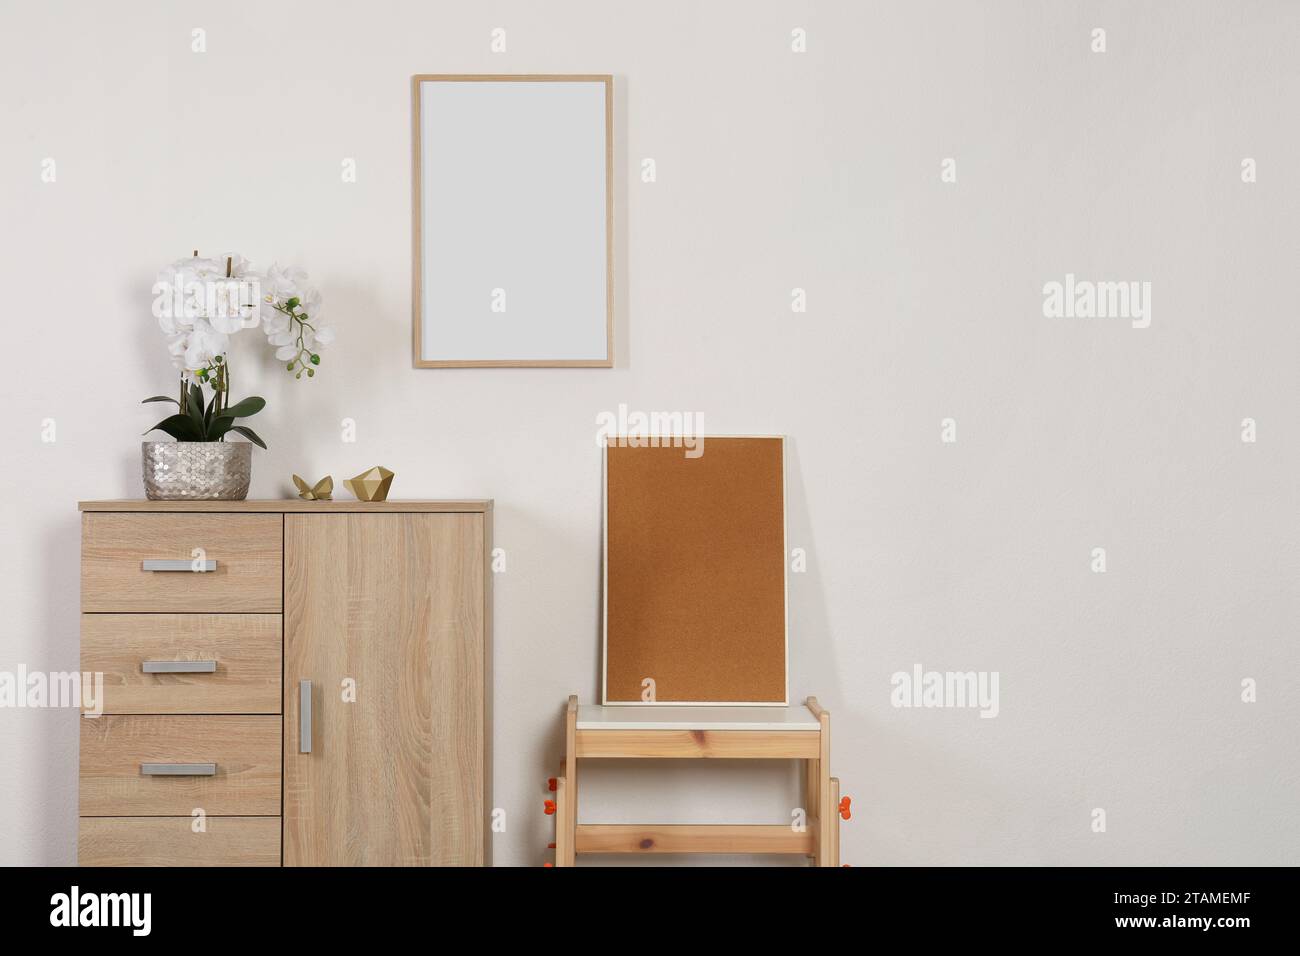 Chest of drawers, table, orchid and picture frames indoors, space for text. Interior design Stock Photo